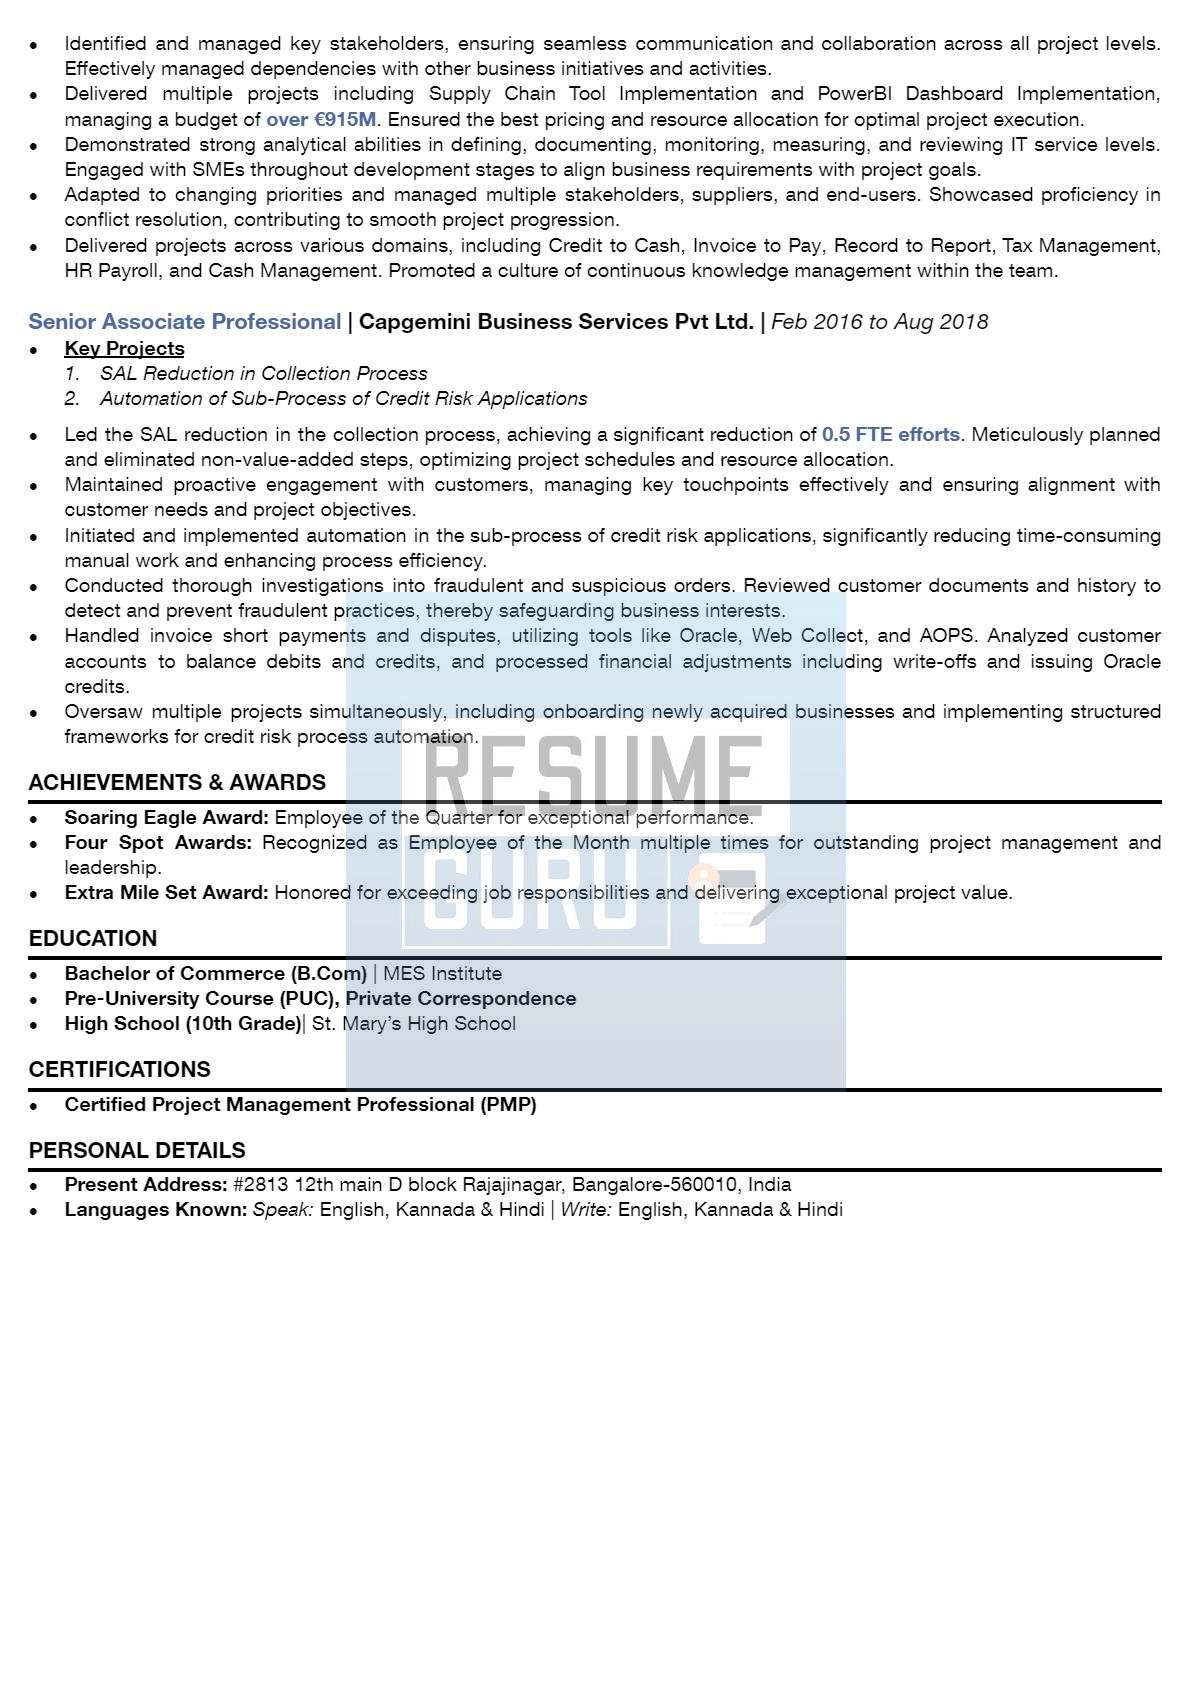 Mid-Level Project Manager Resume Sample_2